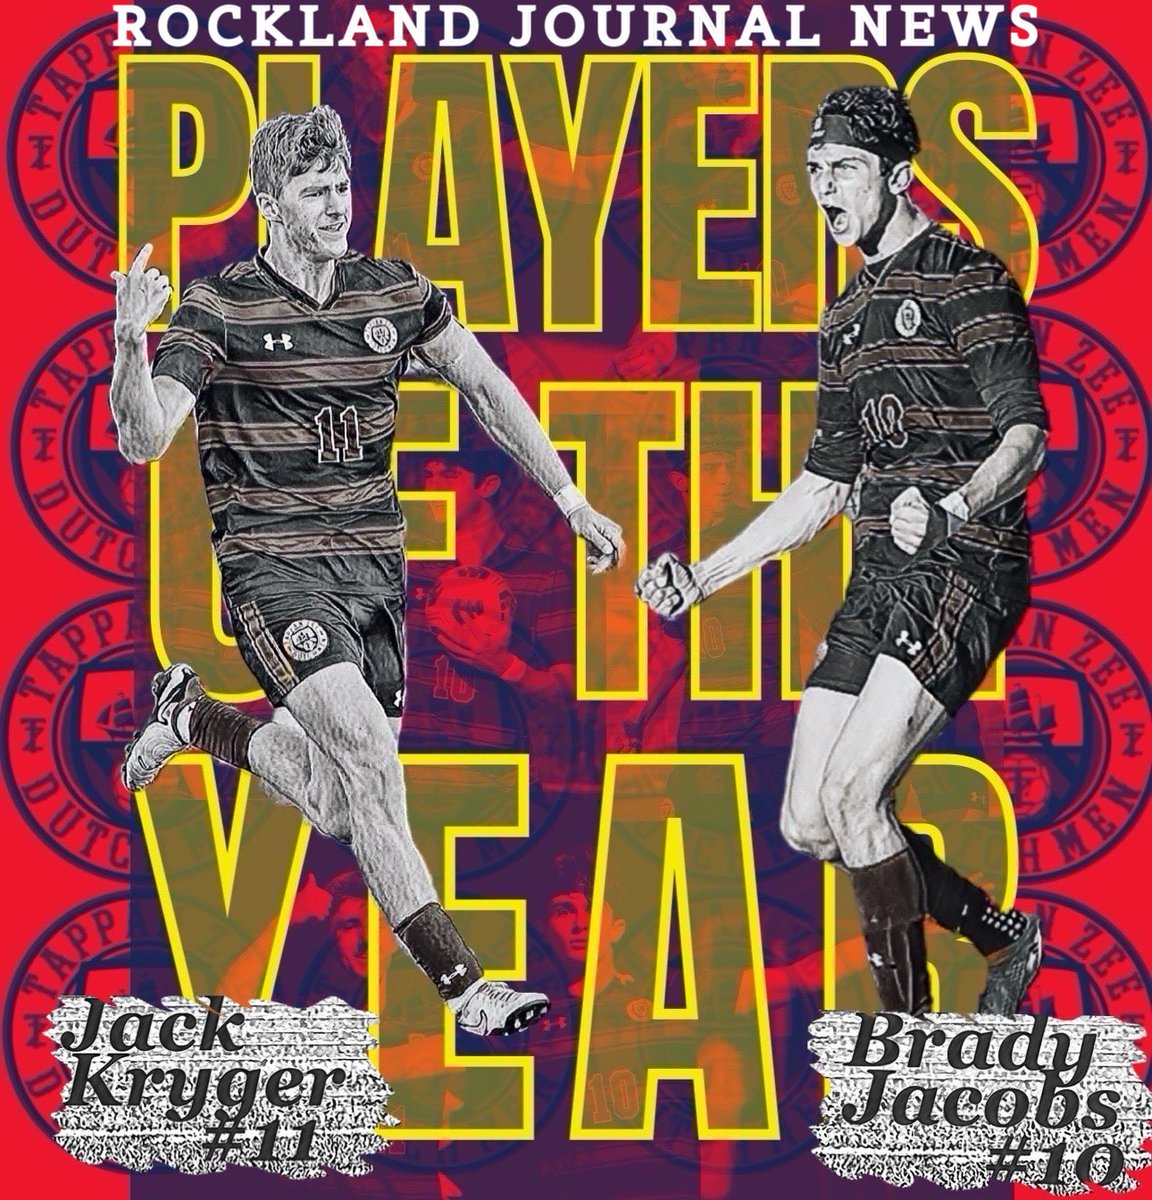 Congratulations to @bradywcfc10 and @JackKryger11 on being selected by the Rockland Journal News as the 2023 Boys Soccer Players of the Year! The dynamic duo combined for 51 goals and 30 assists leading the way to their 3rd straight league title! @TZeeAthletics @WorldClassFC1